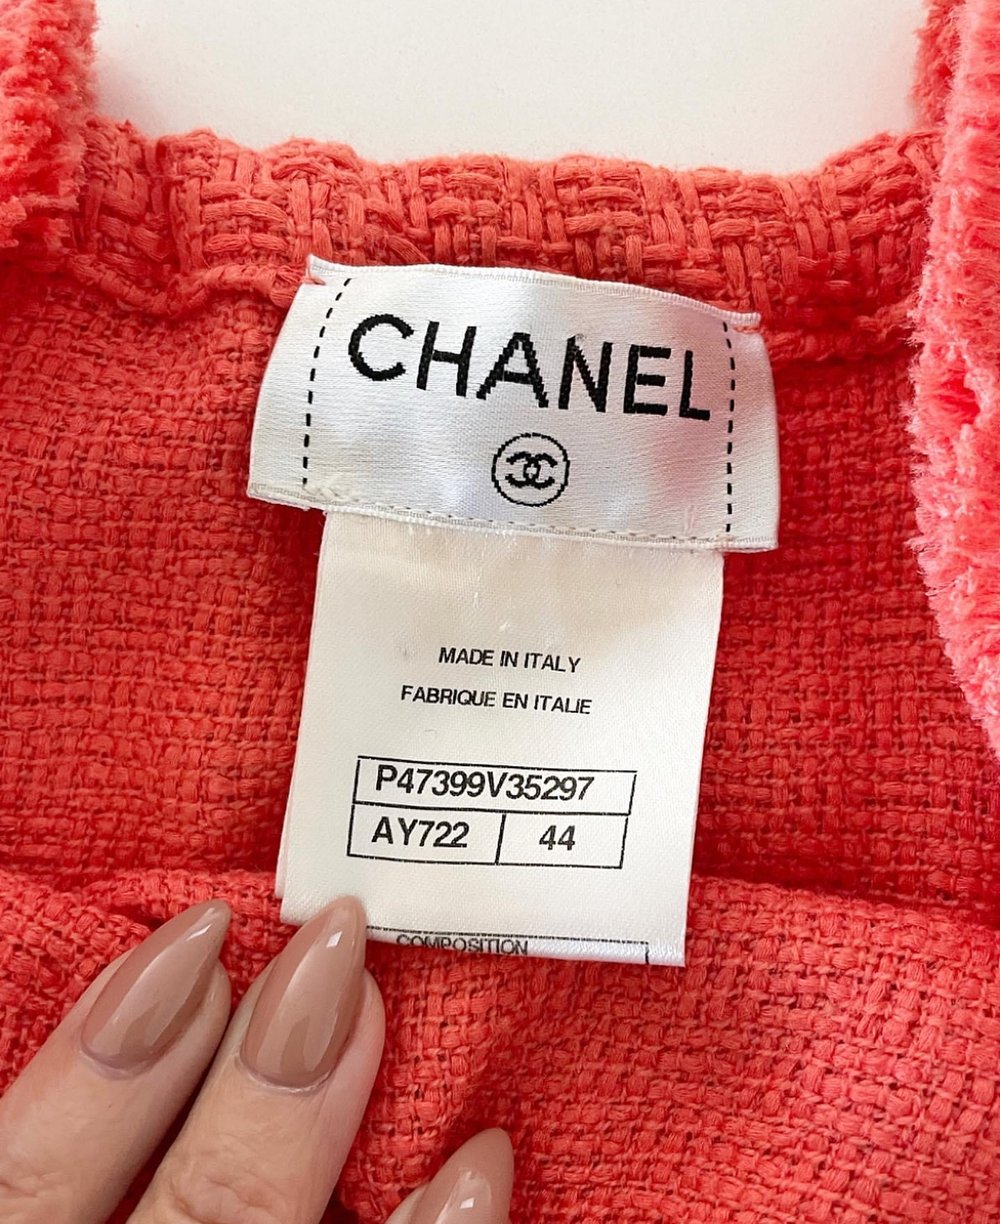 Chanel Orange/Coral Cotton and Wool Tweed Dress in excellent condition.  Size 44/14 or US size 4 to 8 — Nicole Cripe Style